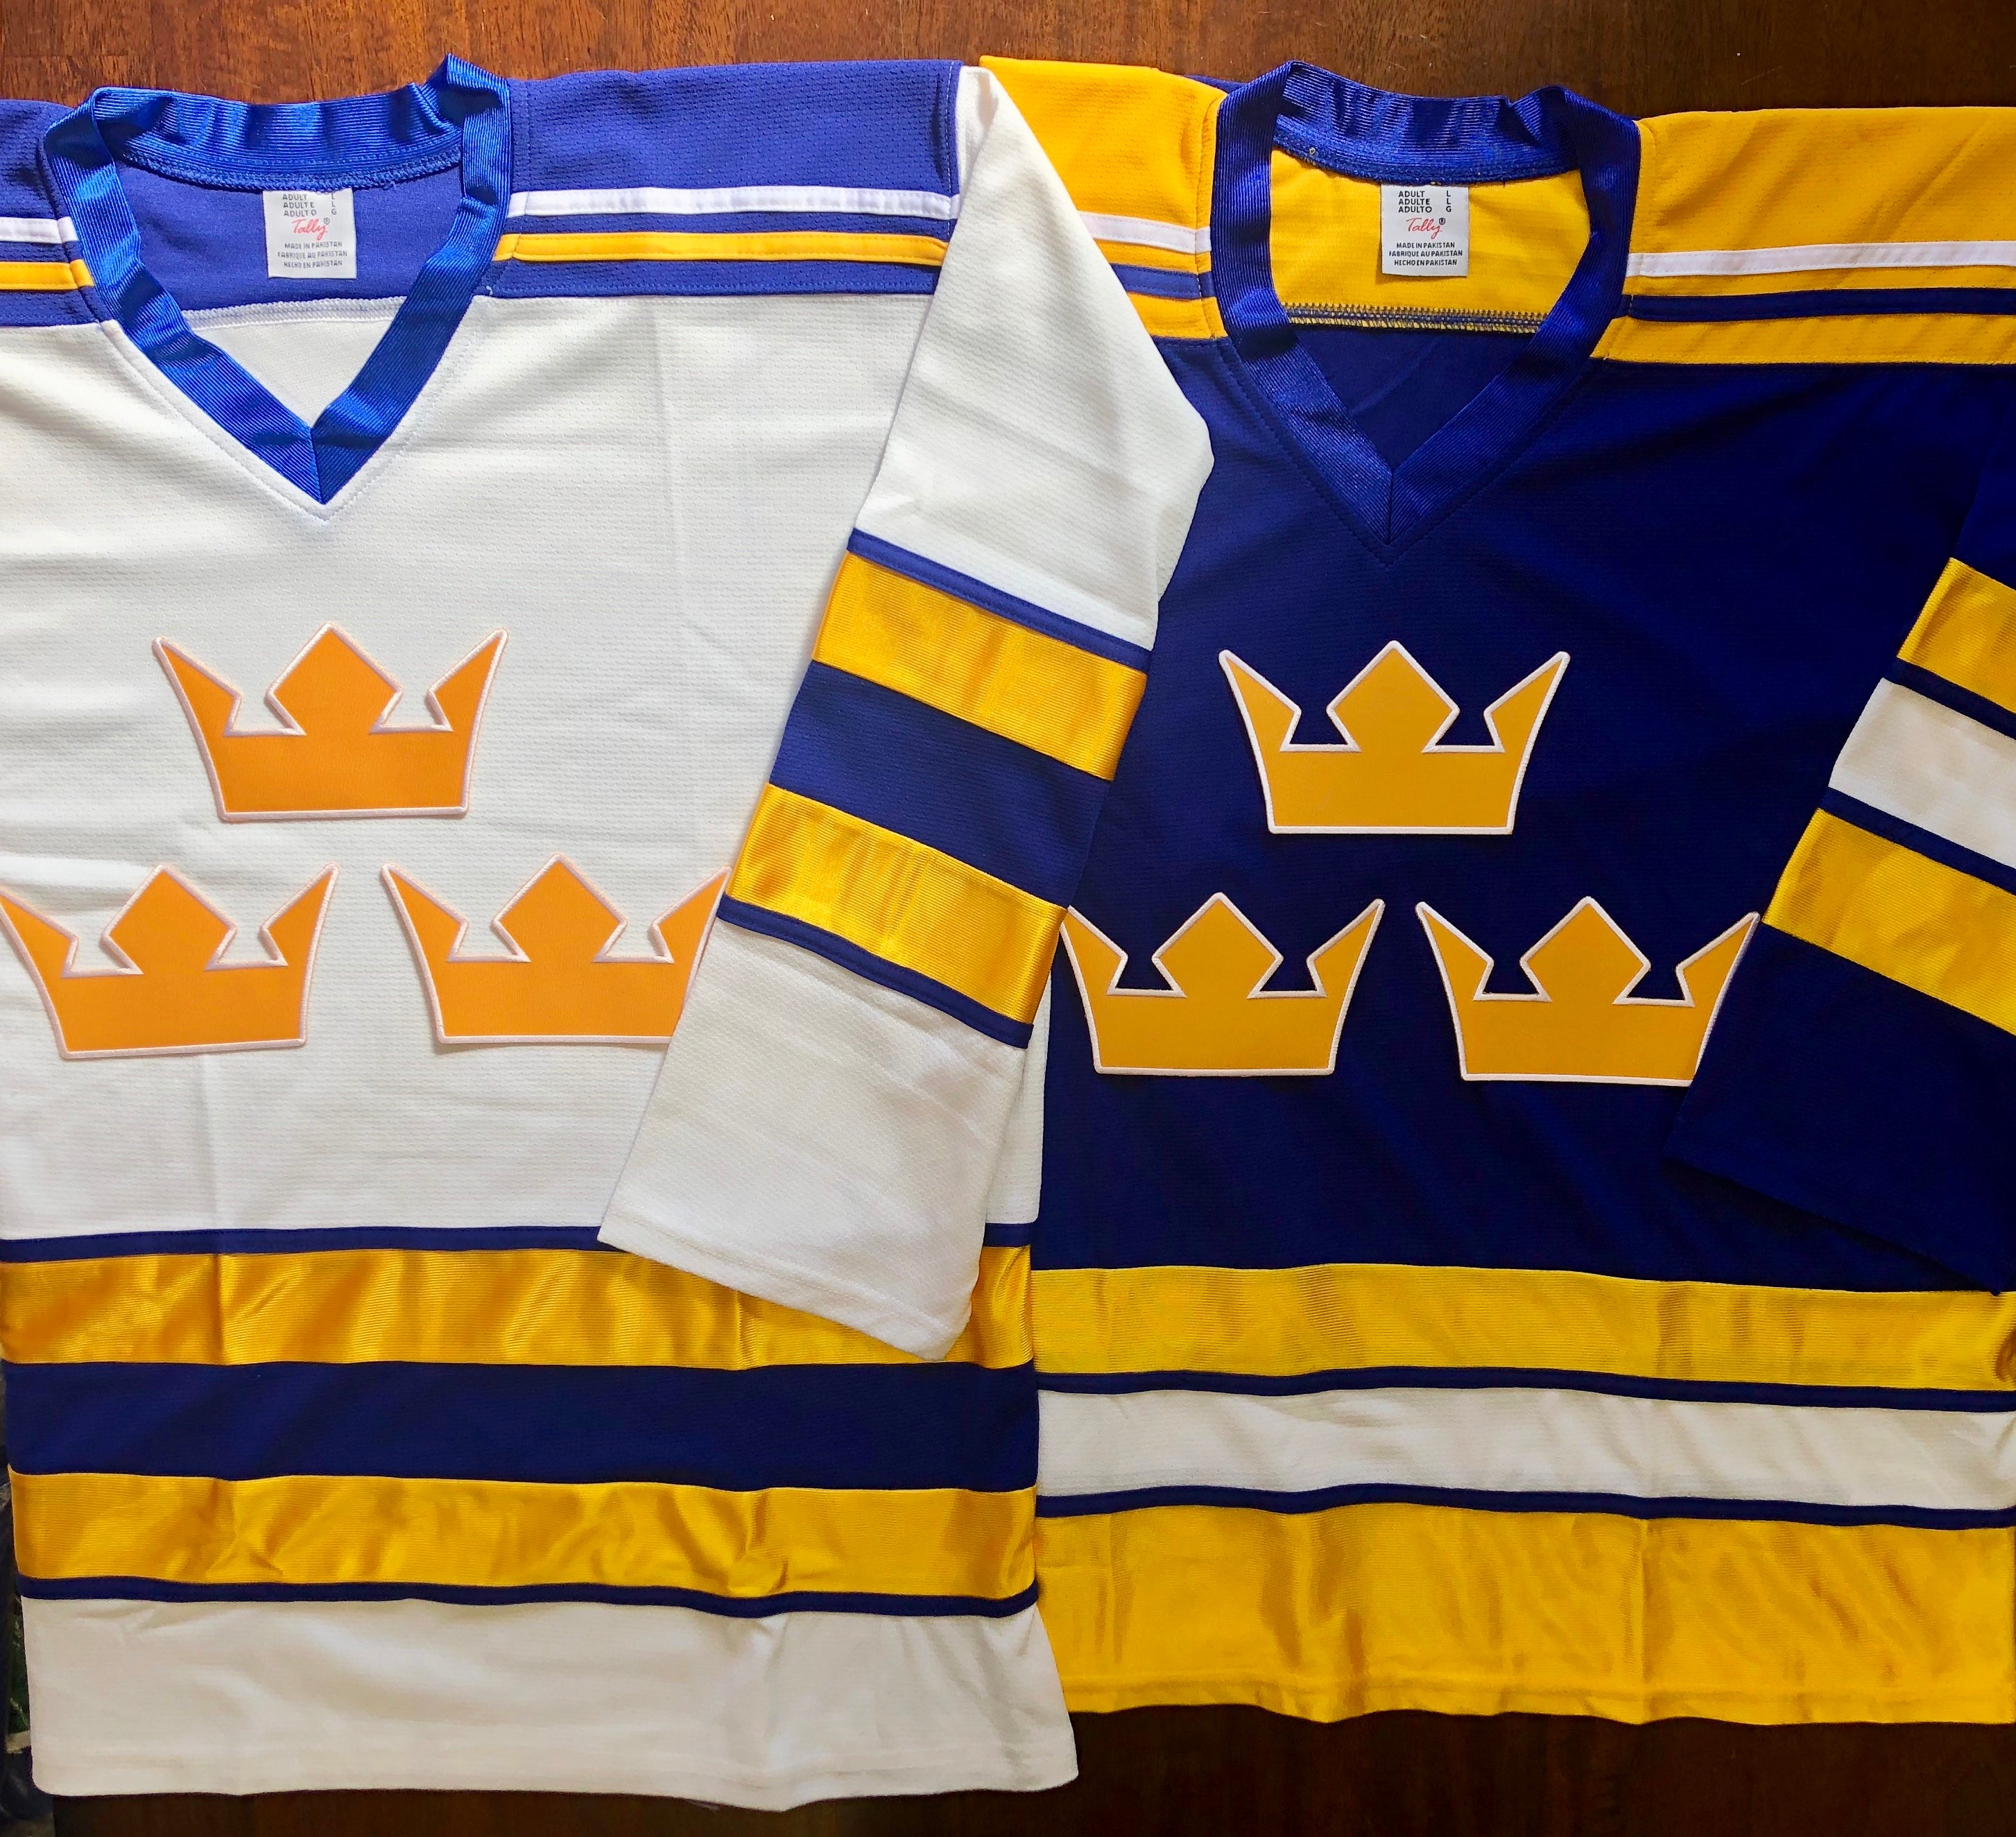 IIHF Team Sweden Customized Number Kit for 2010 Royal Blue Hockey Jersey –  Customize Sports